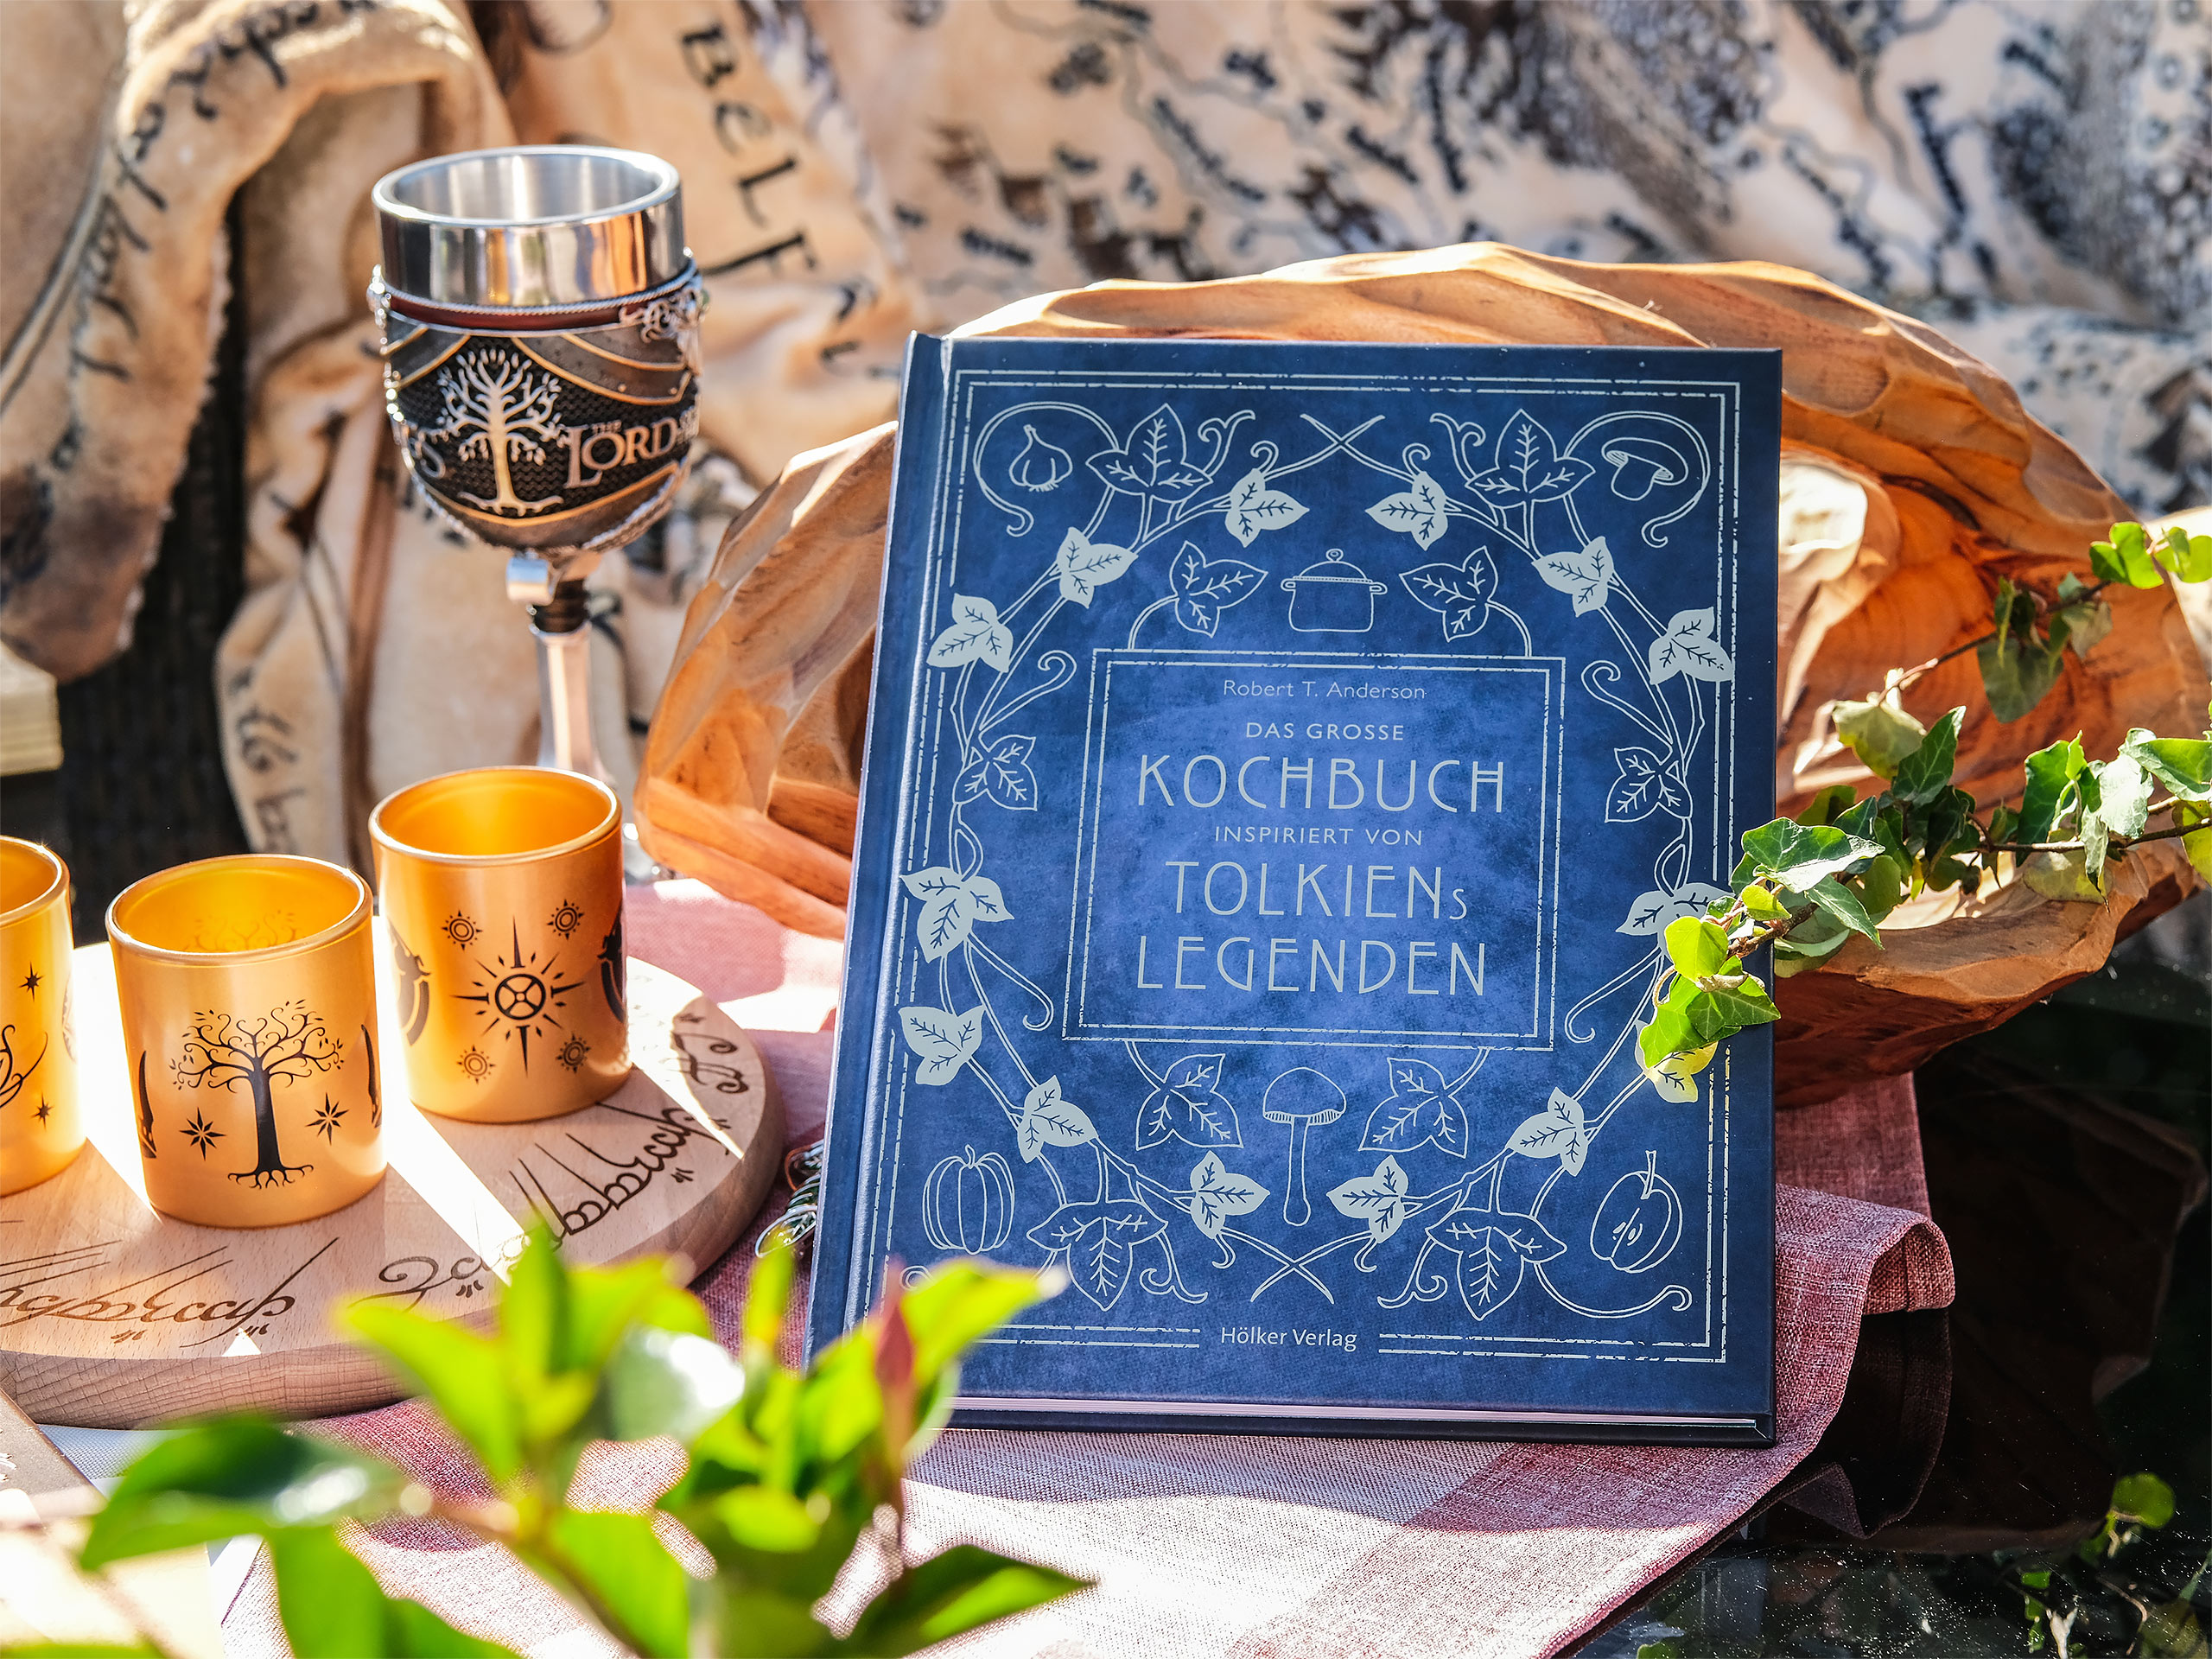 The Great Cookbook Inspired by Tolkien's Legends